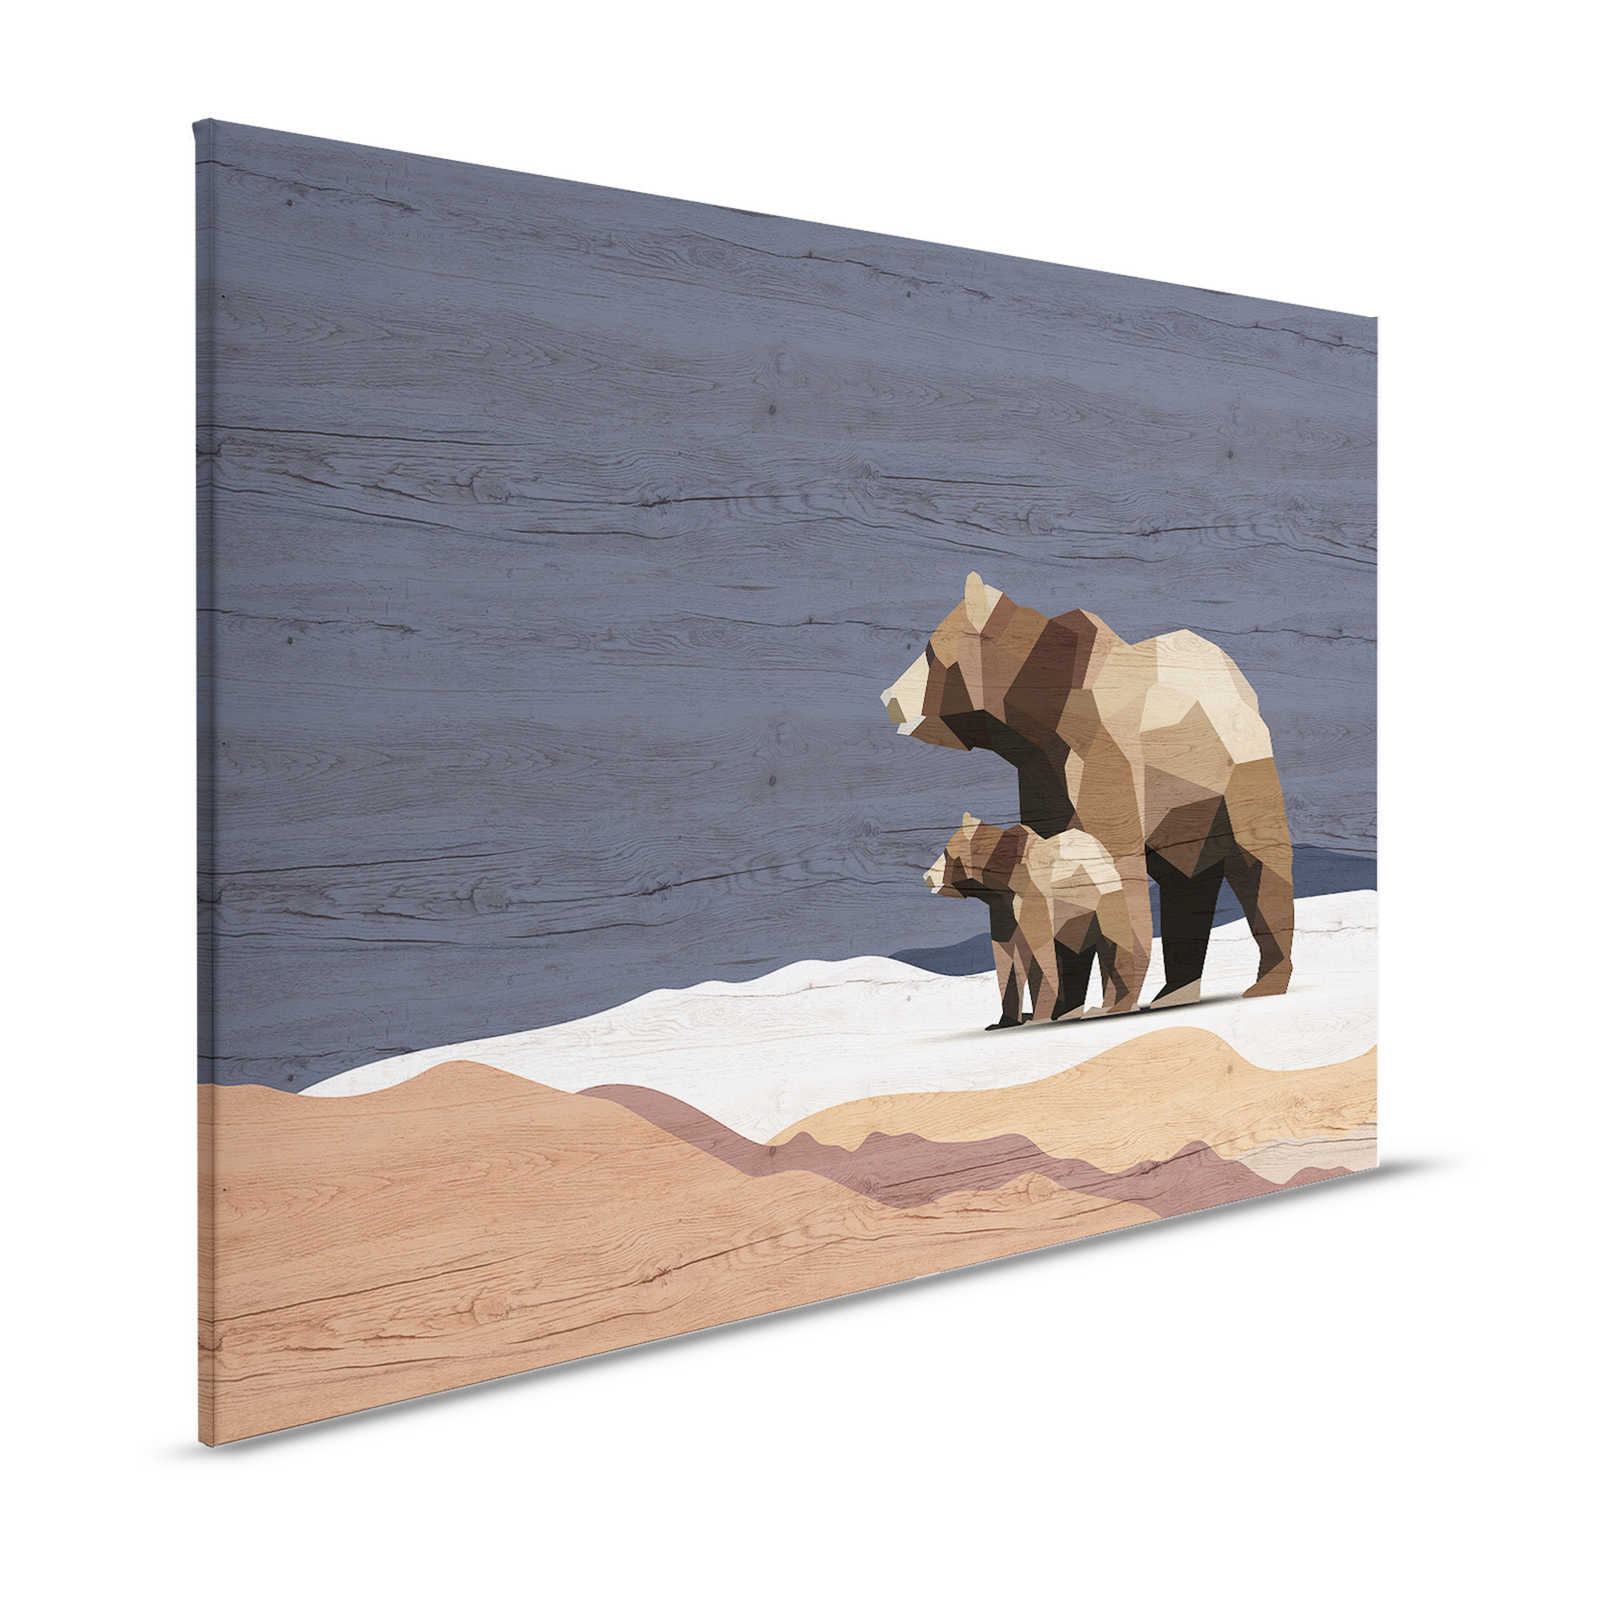 Yukon 3 - Canvas painting Bears Family in facet design & wood look - 1,20 m x 0,80 m
